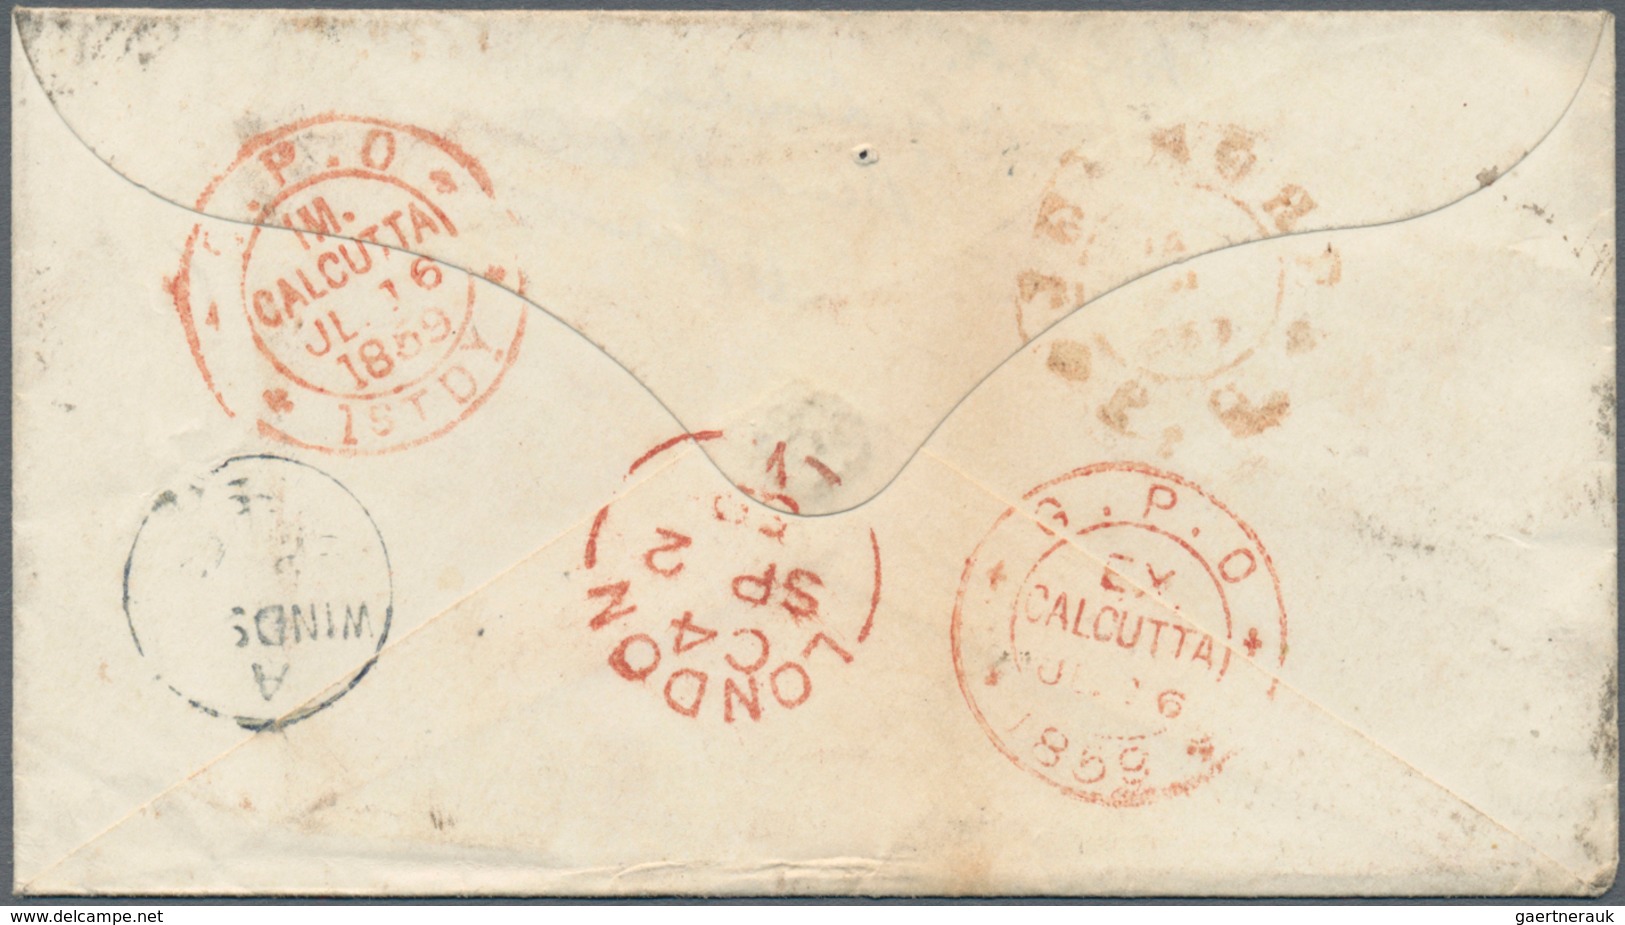 08697 Indien: 1854/64, covers (5) used to England x4 (Calcutta) and within India x1 (Jessore), also uprate